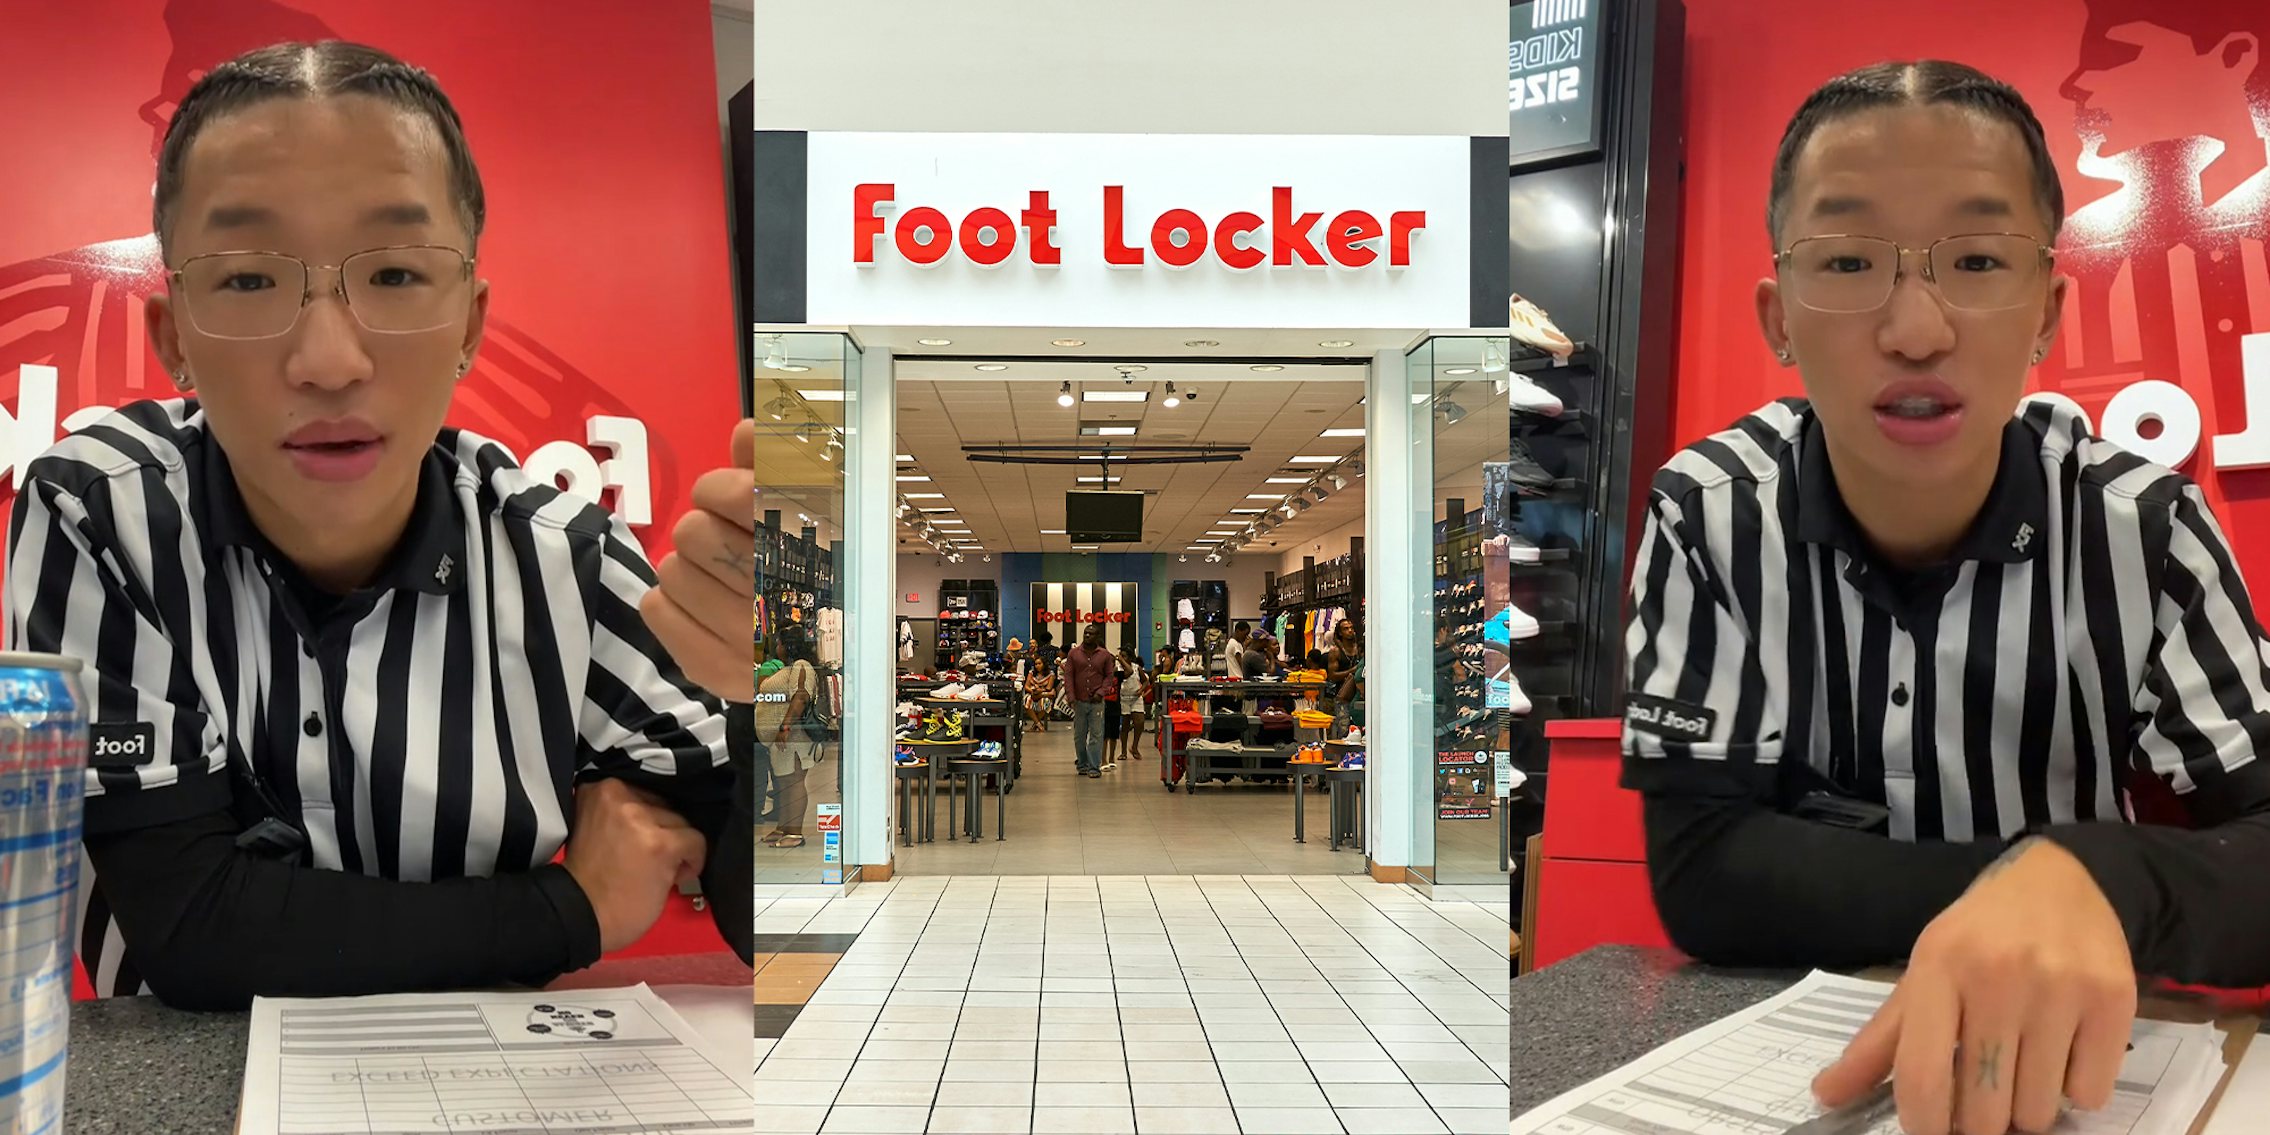 Footlocker worker blasts customers who demand to come into store when its closed